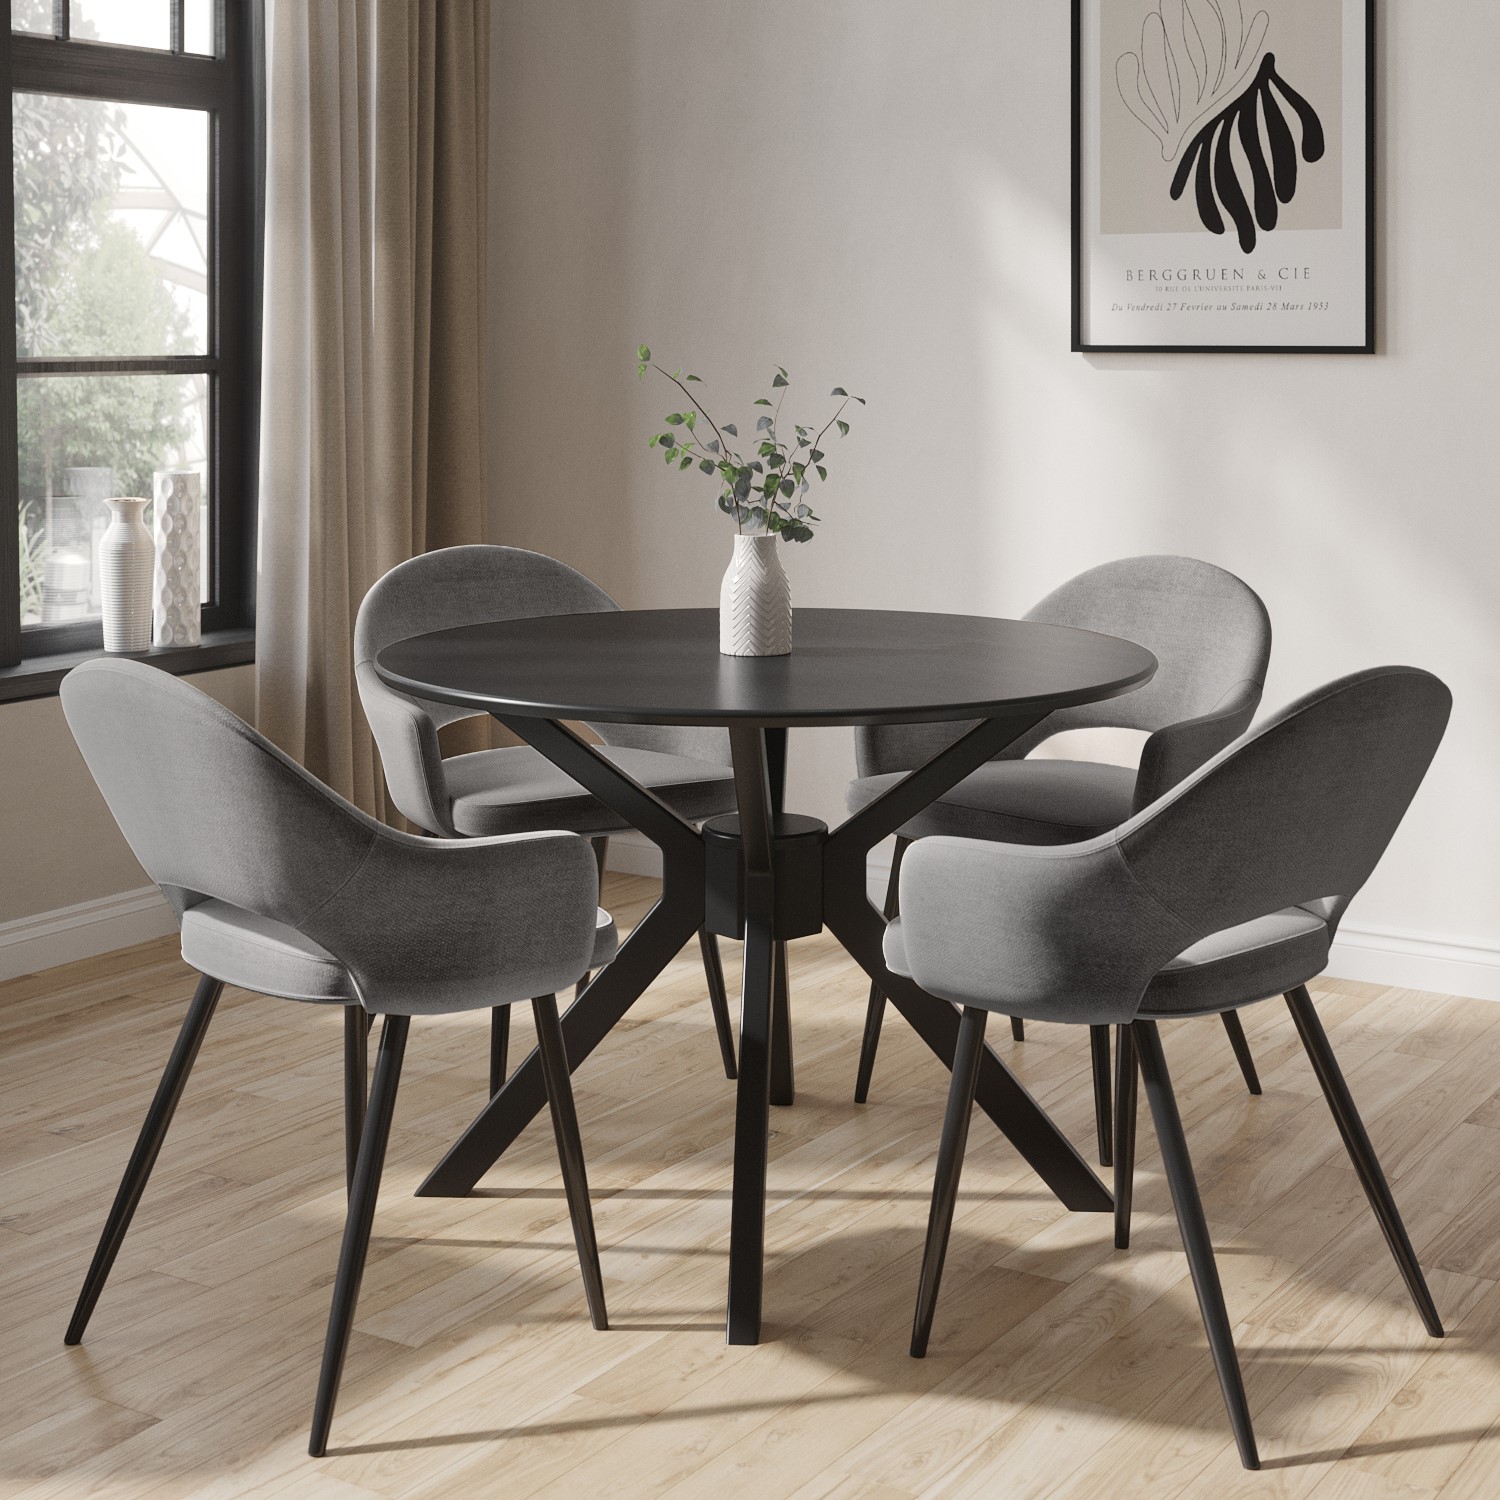 Photo of 4 seater dining set with round black table and grey fabric dining chairs - karie